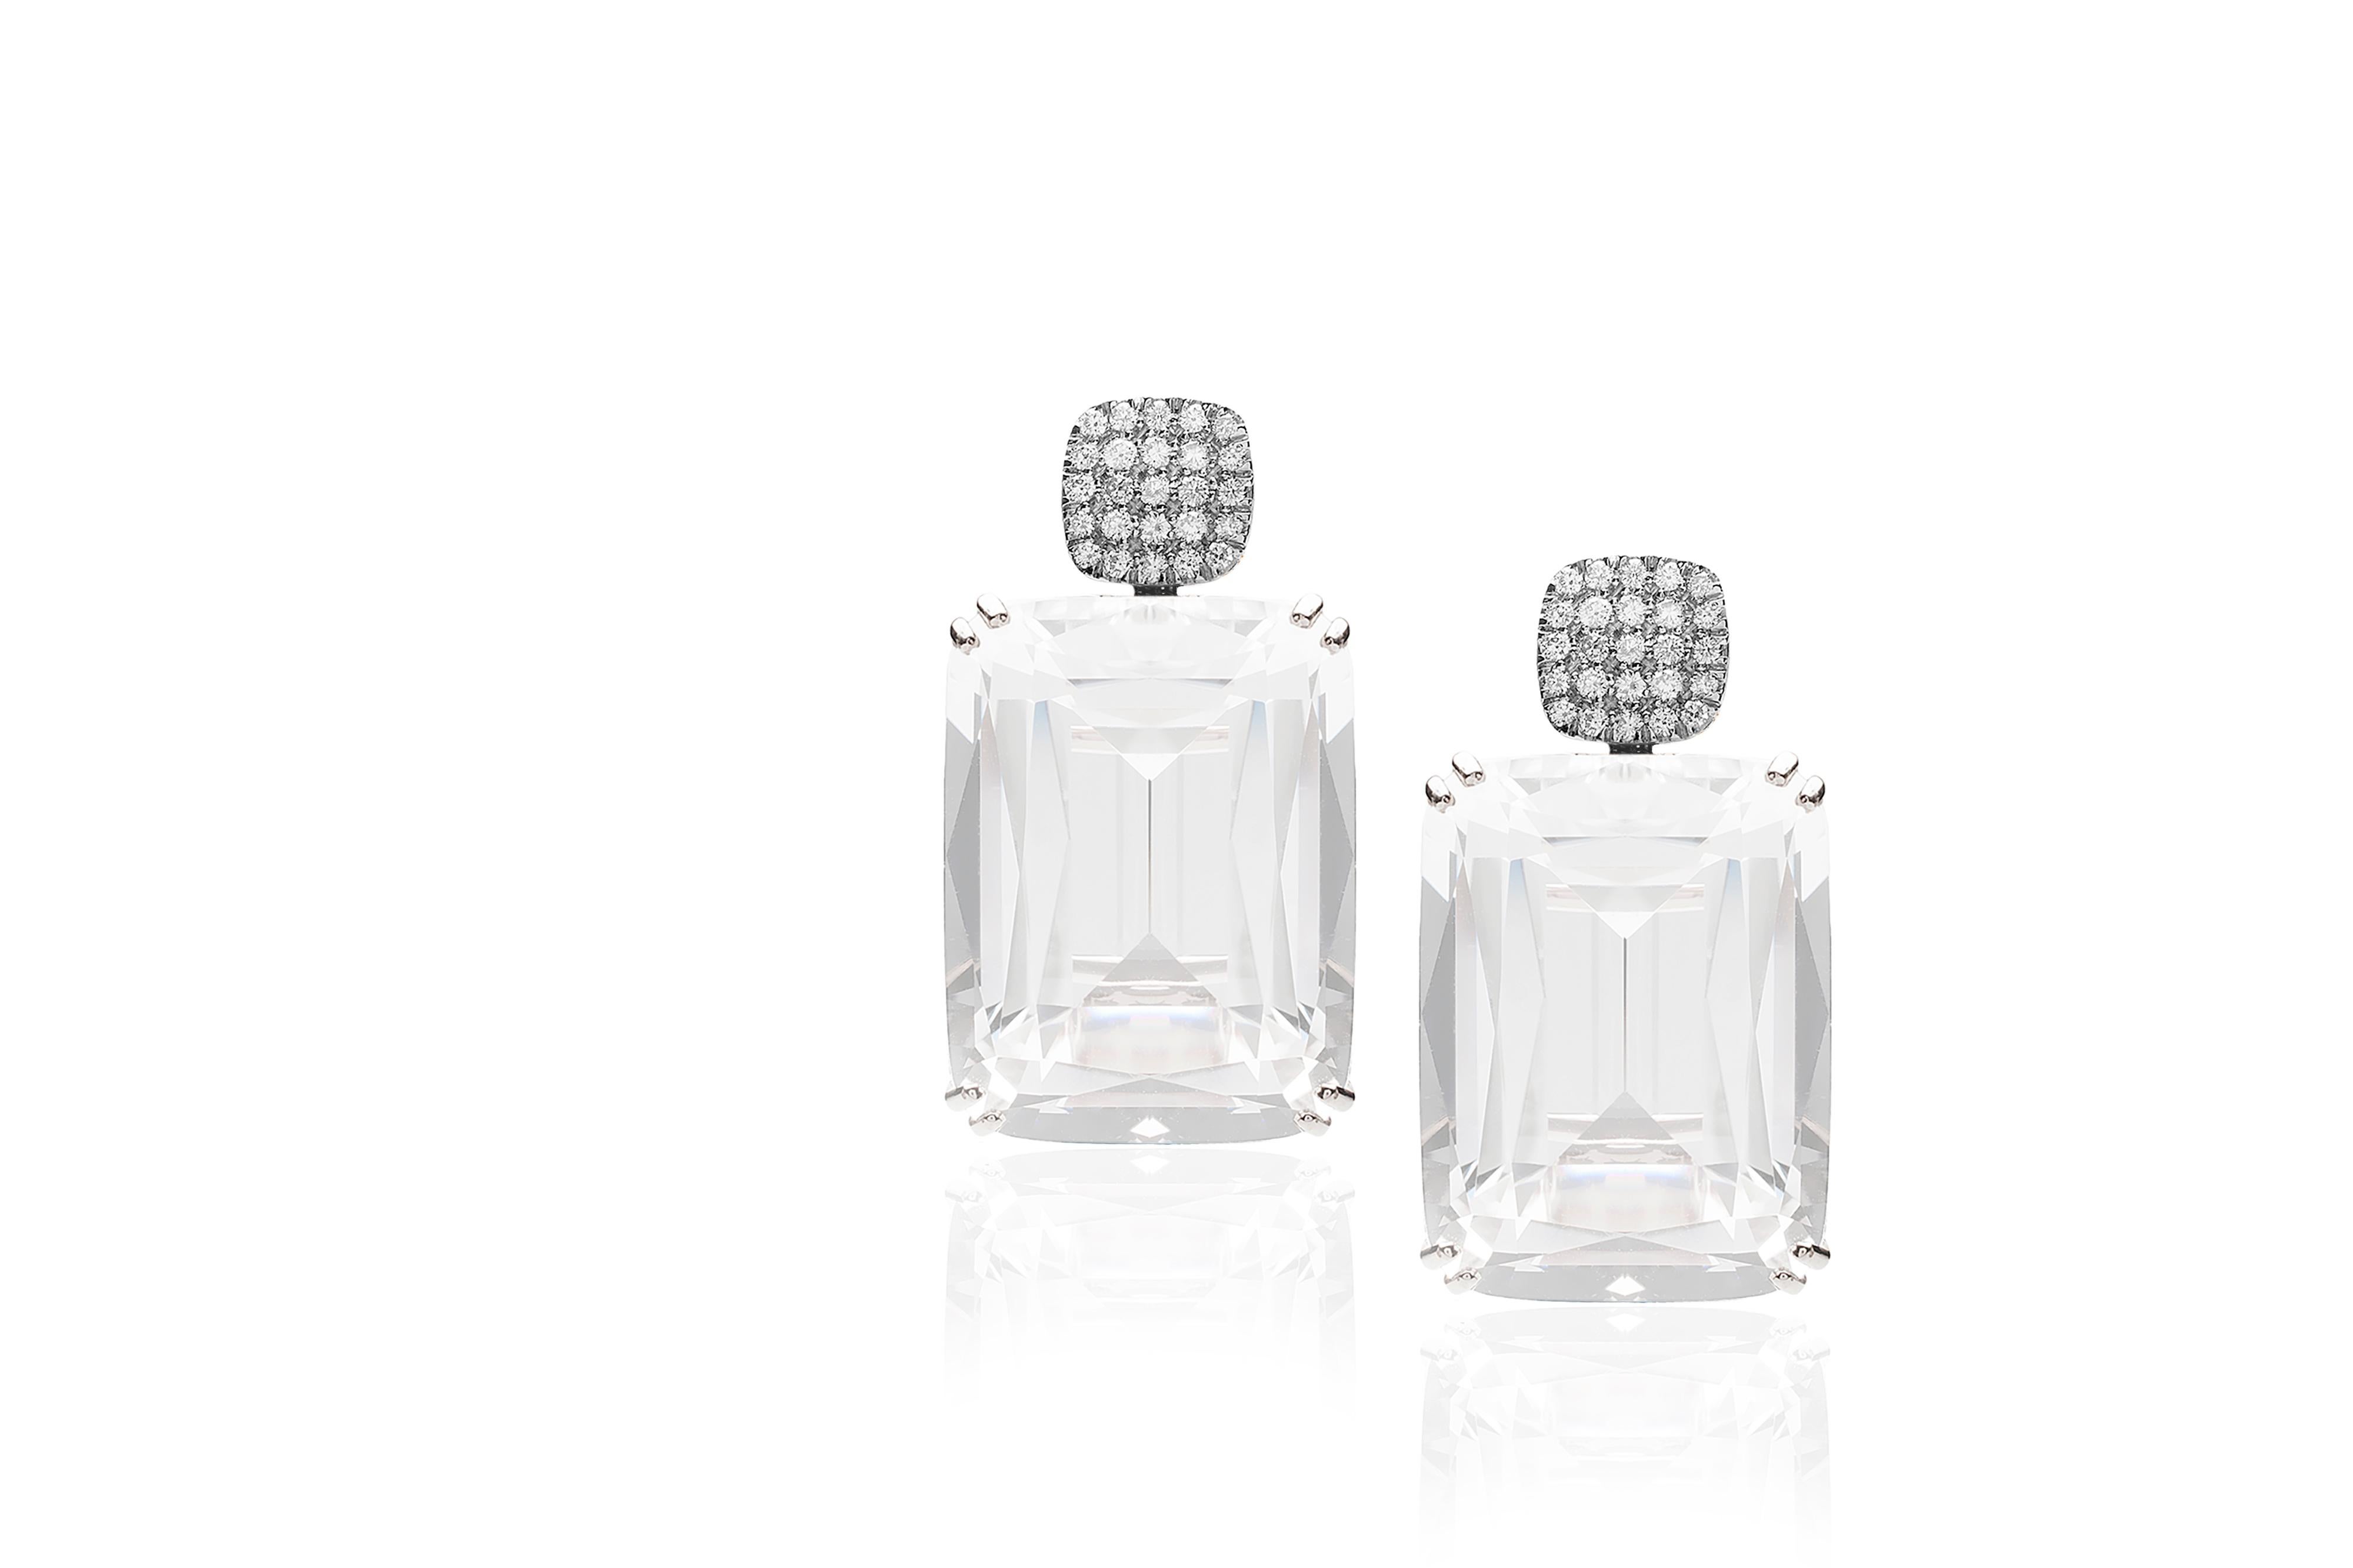 Moon Quartz Cushion Earrings with Diamonds Motif in 18K White Gold, from ‘Gossip’ Collection

Stone Size 20 X 15 mm

Gemstone Approx. Wt: Moon Quartz- 41.00 Carats

Diamonds: G-H / VS, Approx. Wt: 0.36 Carats